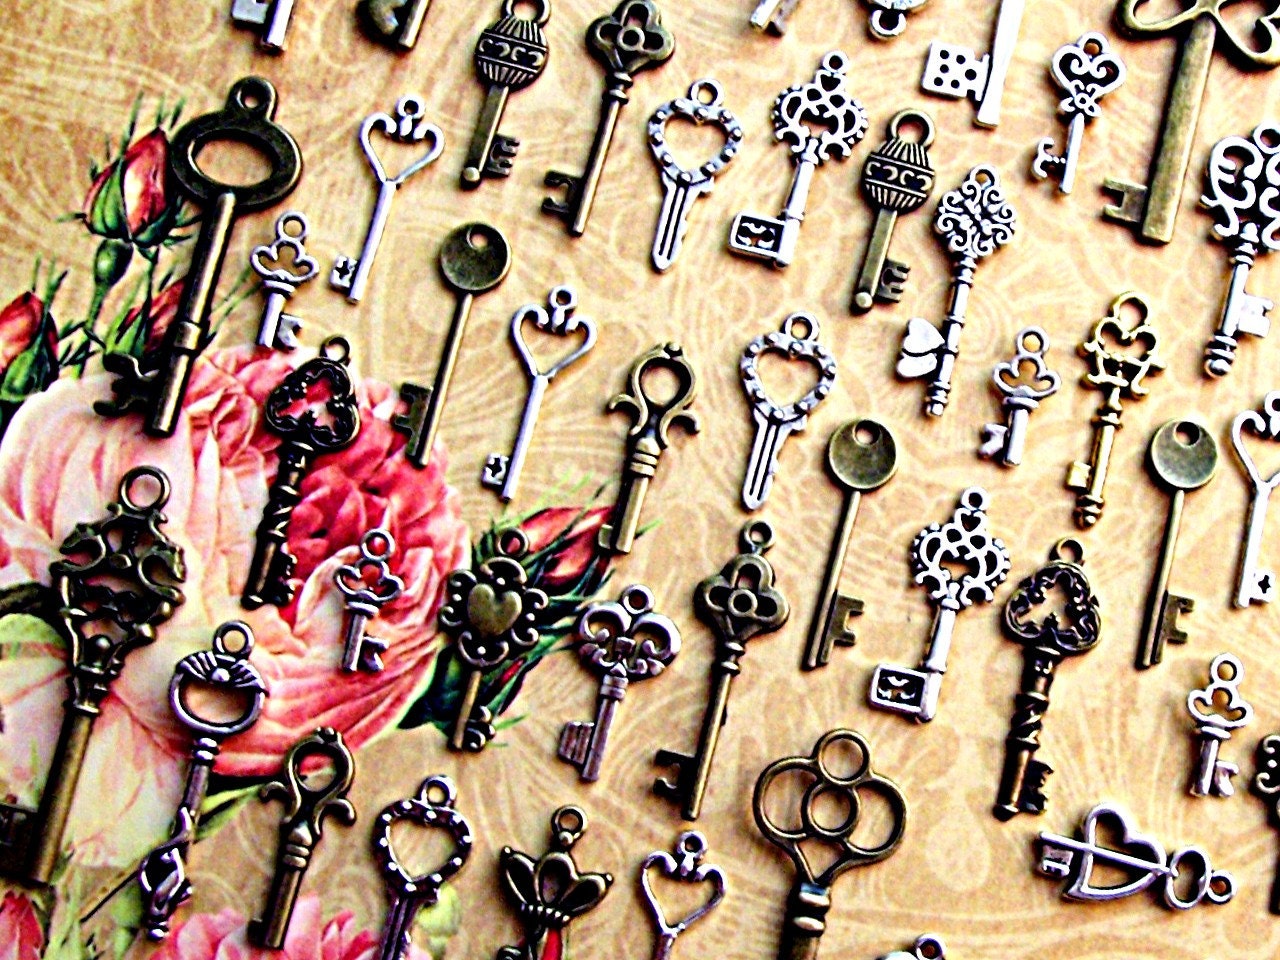 122 New Skeleton Keys Brass Charms Jewelry Steampunk Wedding Beads Supplies Pendant Set Collection Reproduction Vintage Antique Look Crafts